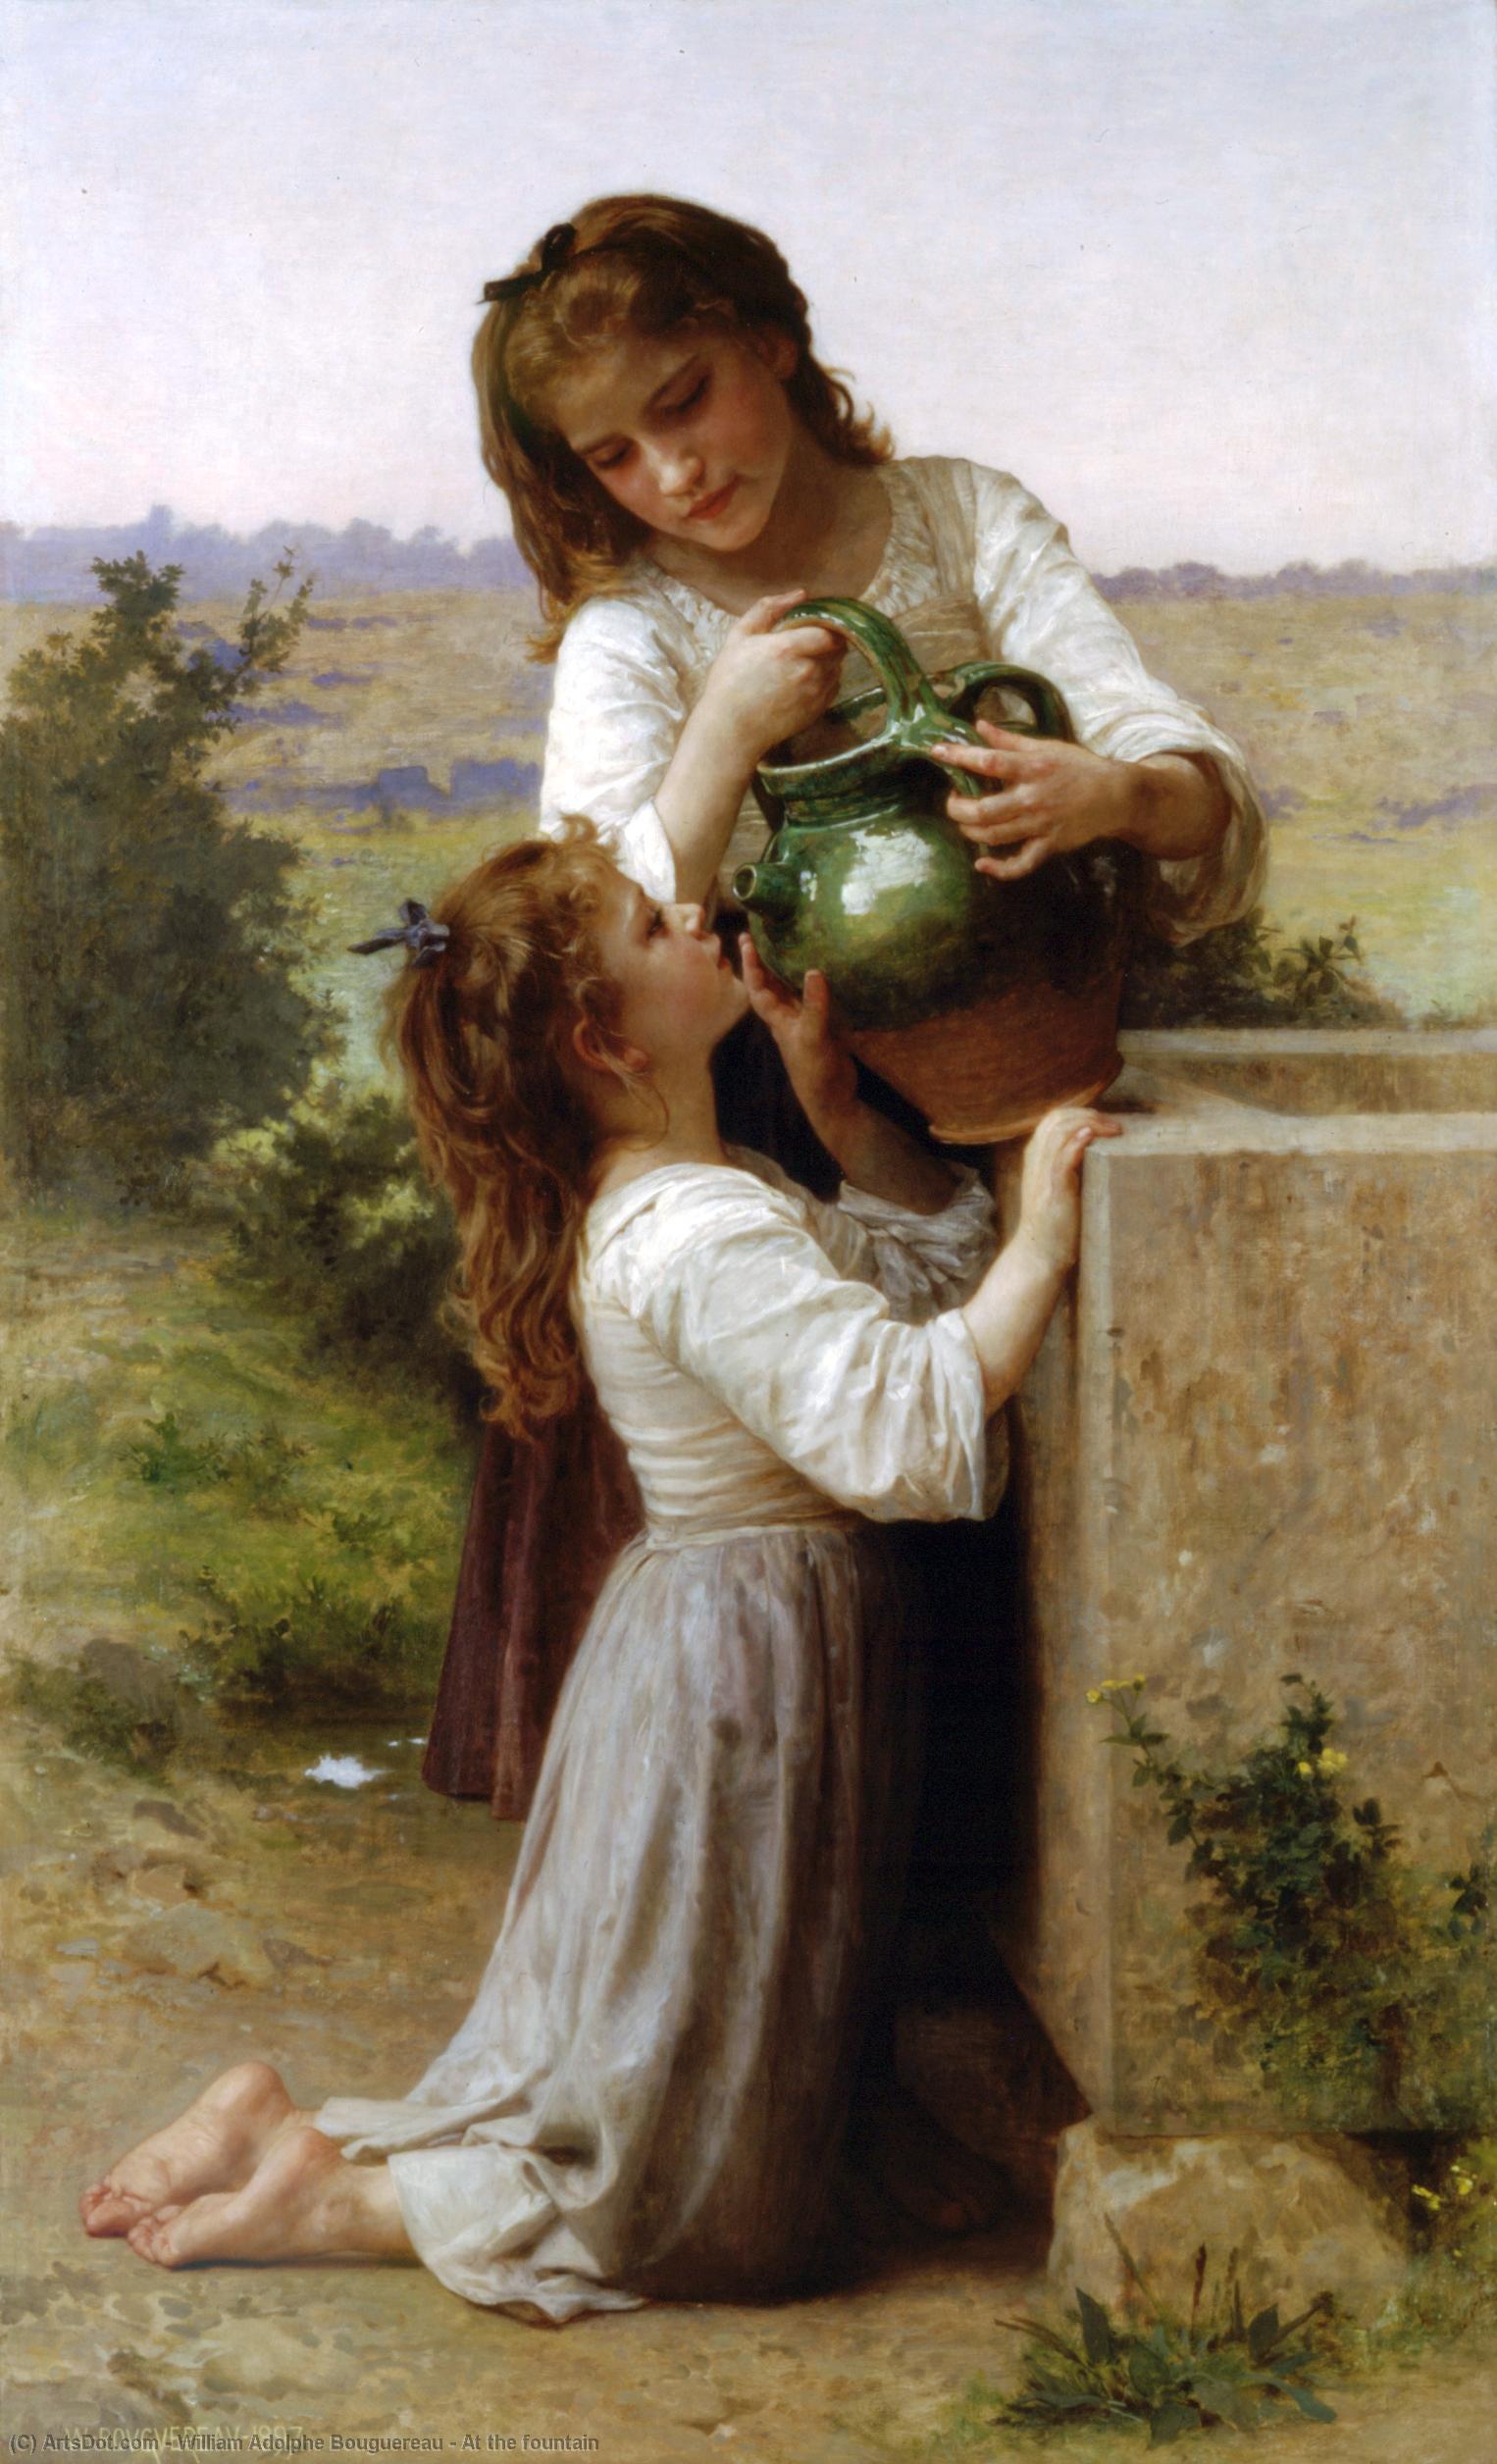 WikiOO.org - 백과 사전 - 회화, 삽화 William Adolphe Bouguereau - At the fountain